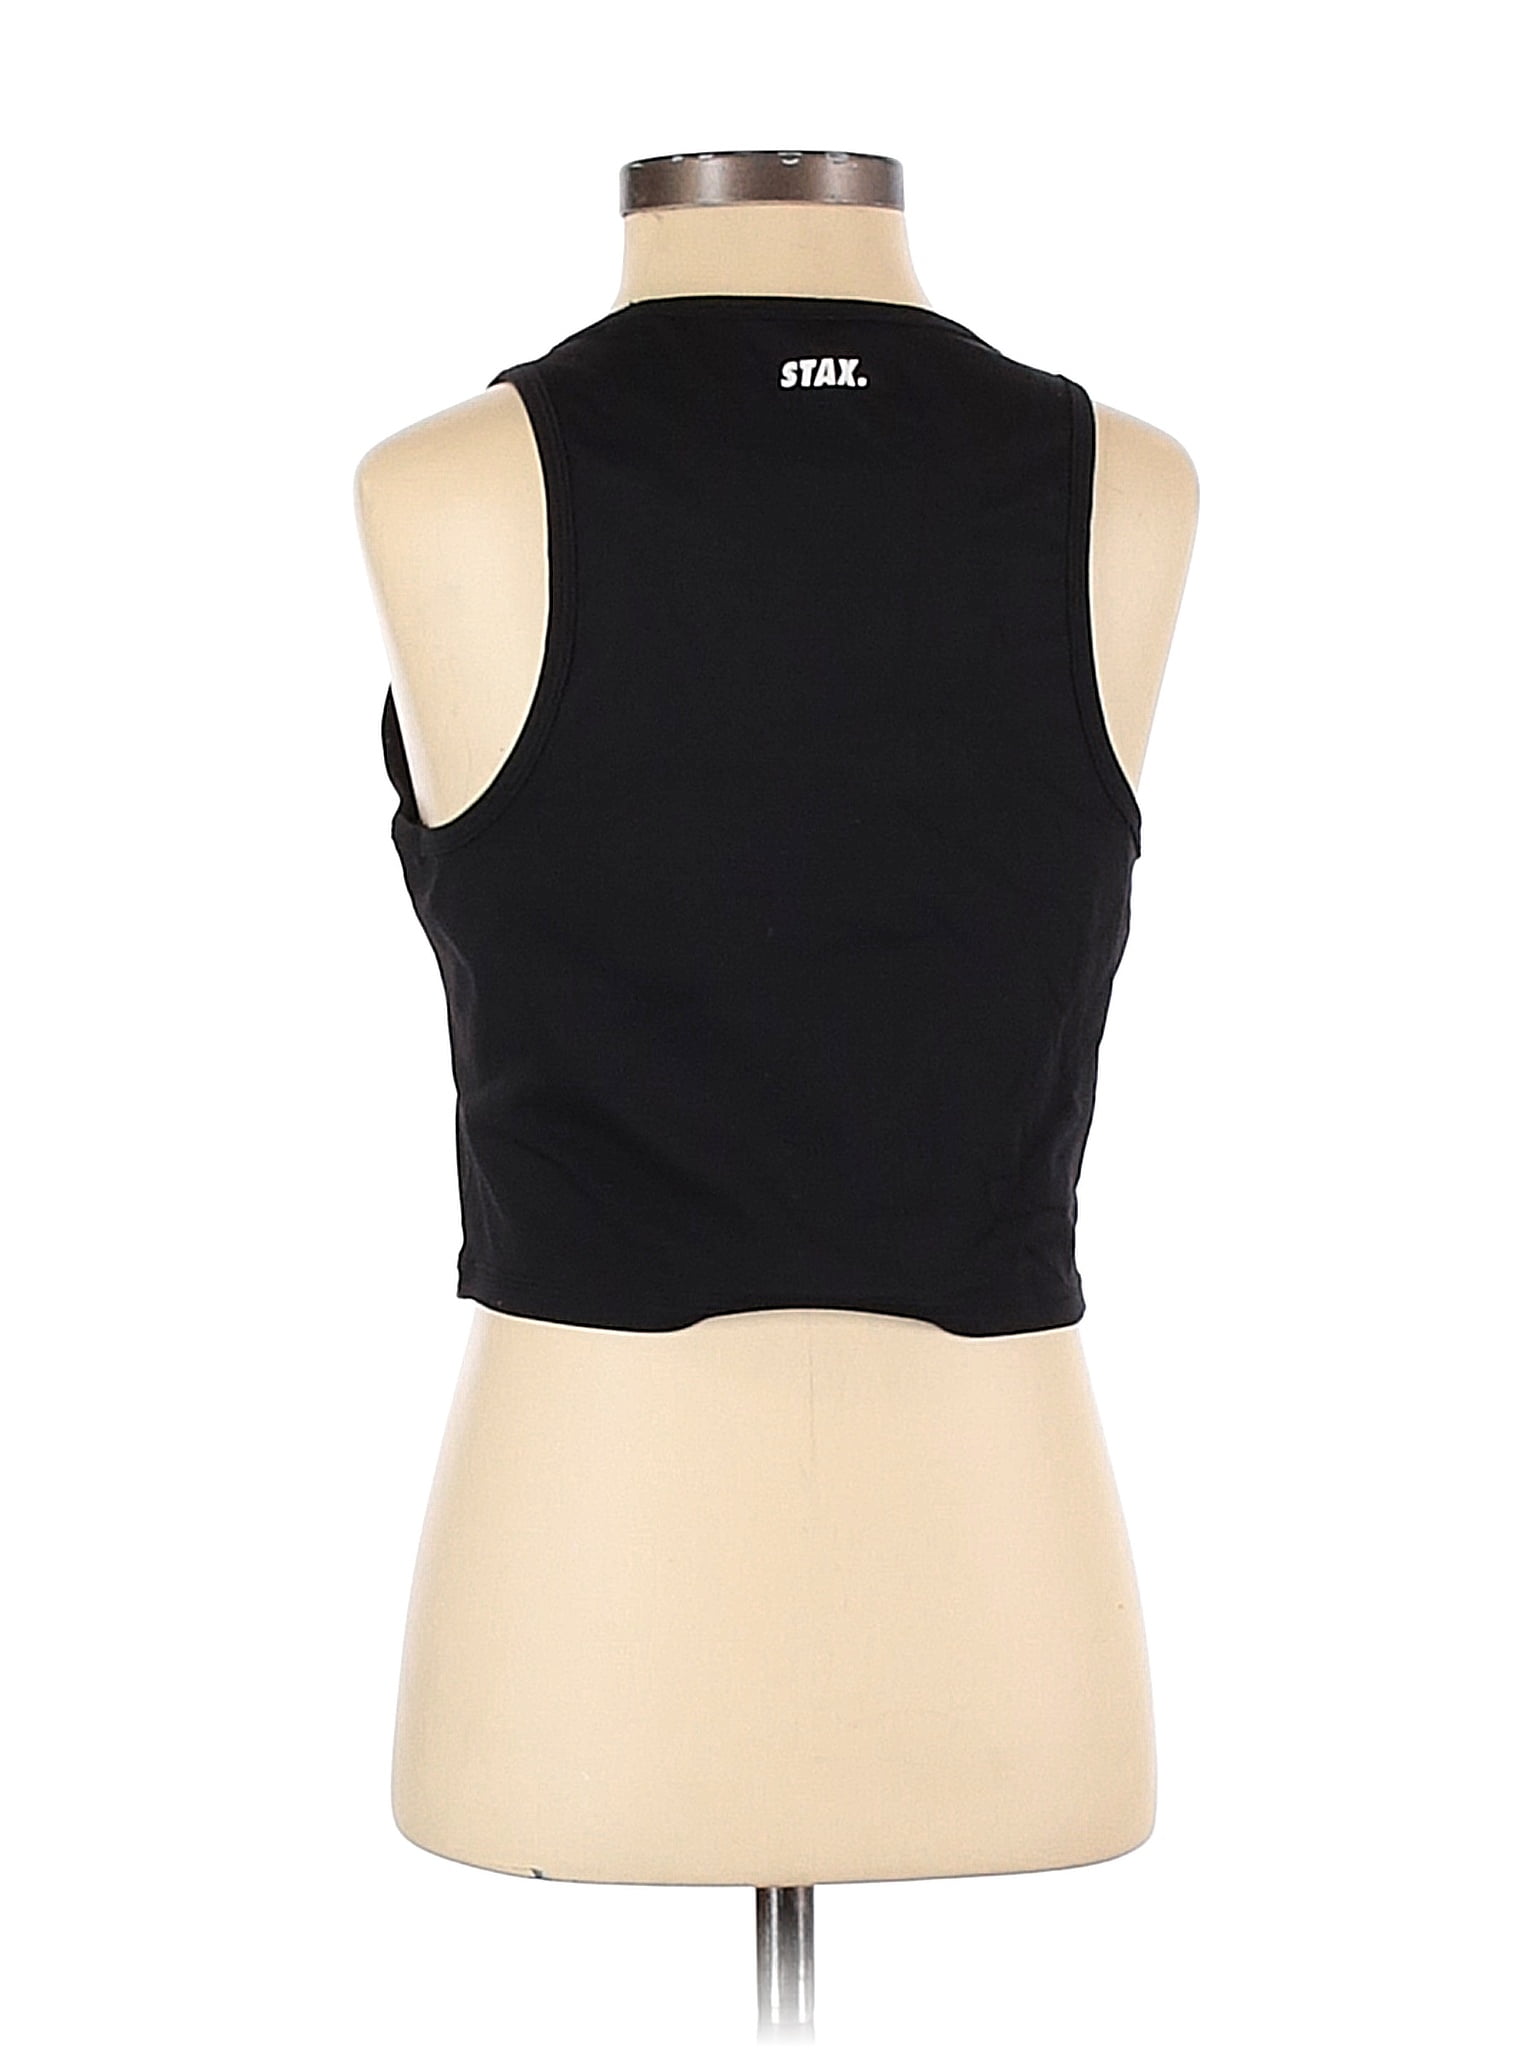 STAX. Graphic Black Tank Top Size S - 60% off